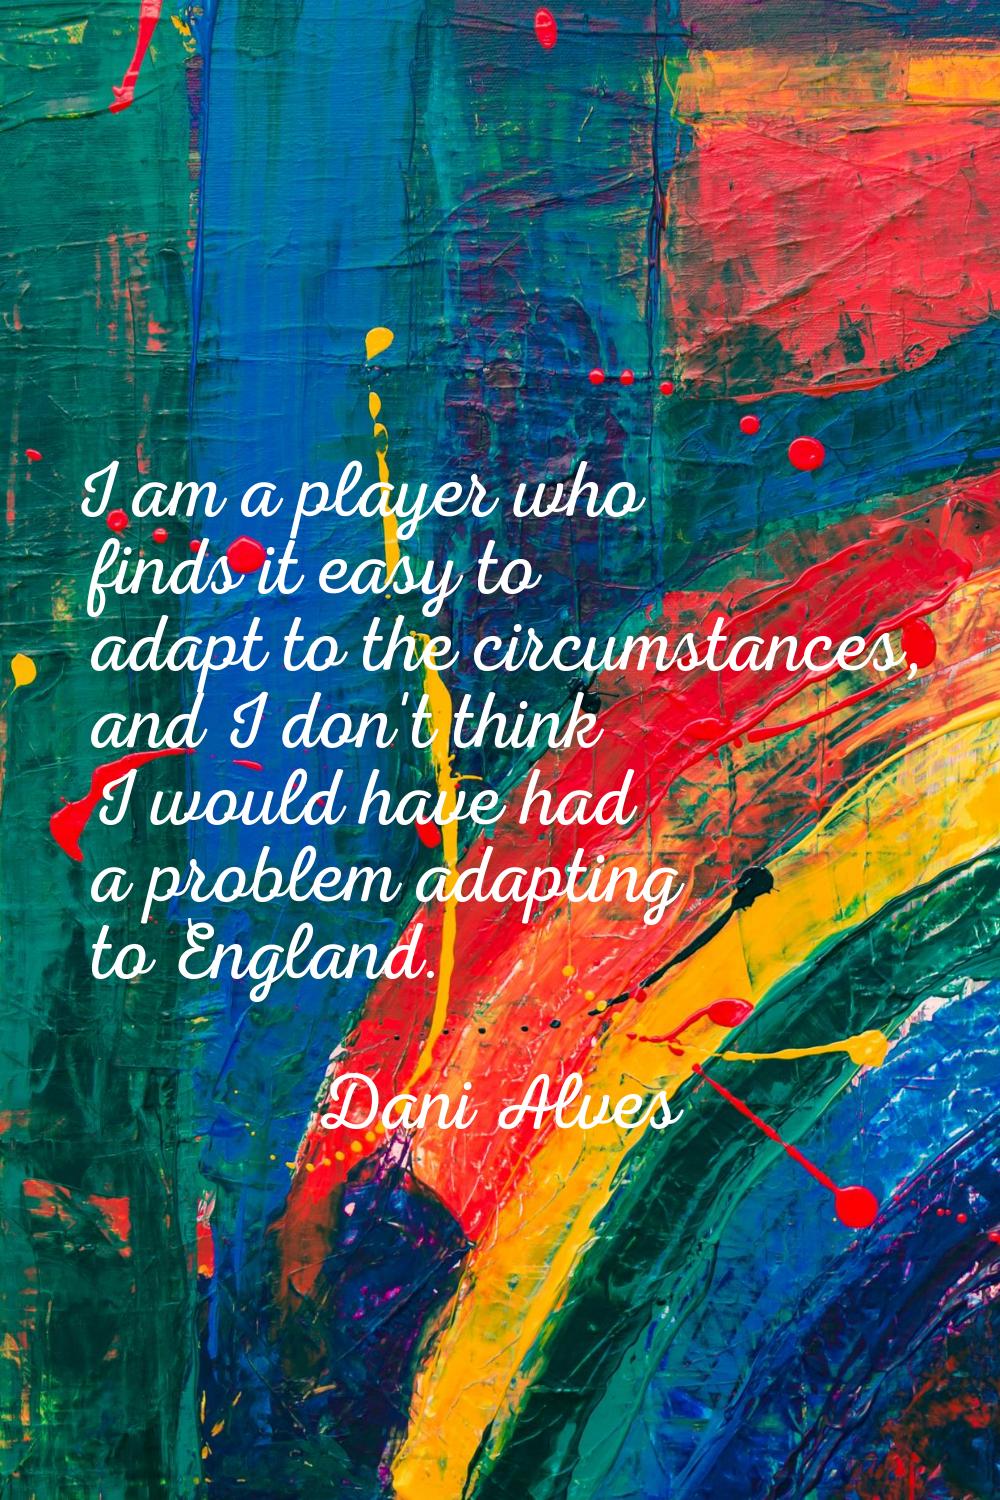 I am a player who finds it easy to adapt to the circumstances, and I don't think I would have had a